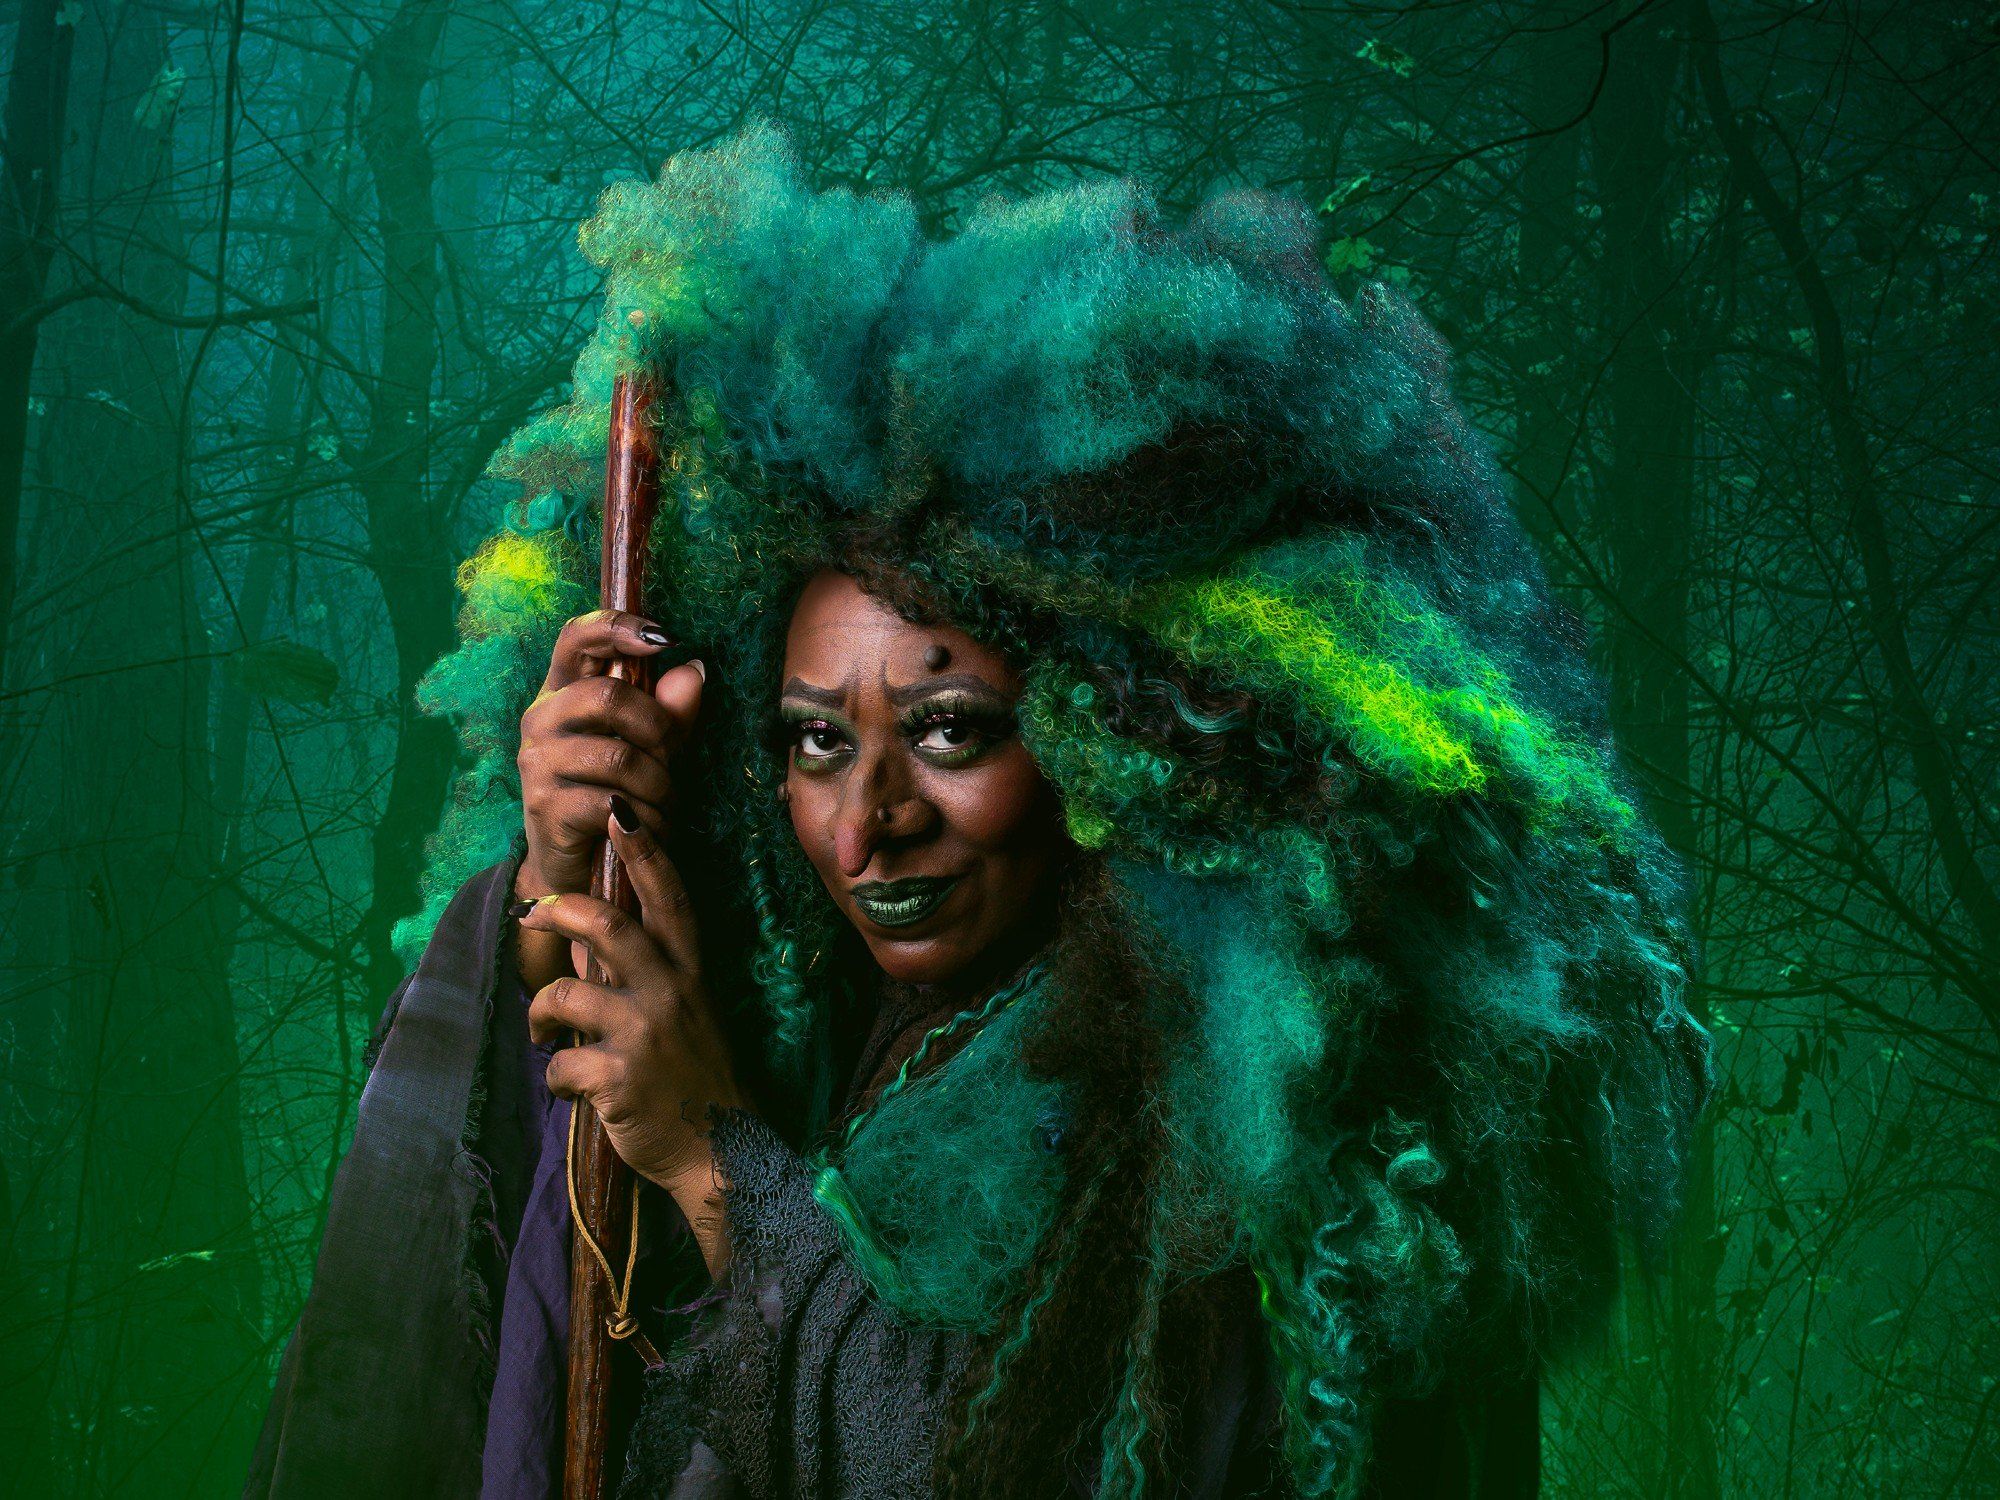 Dallas Theater Center presents Into the Woods